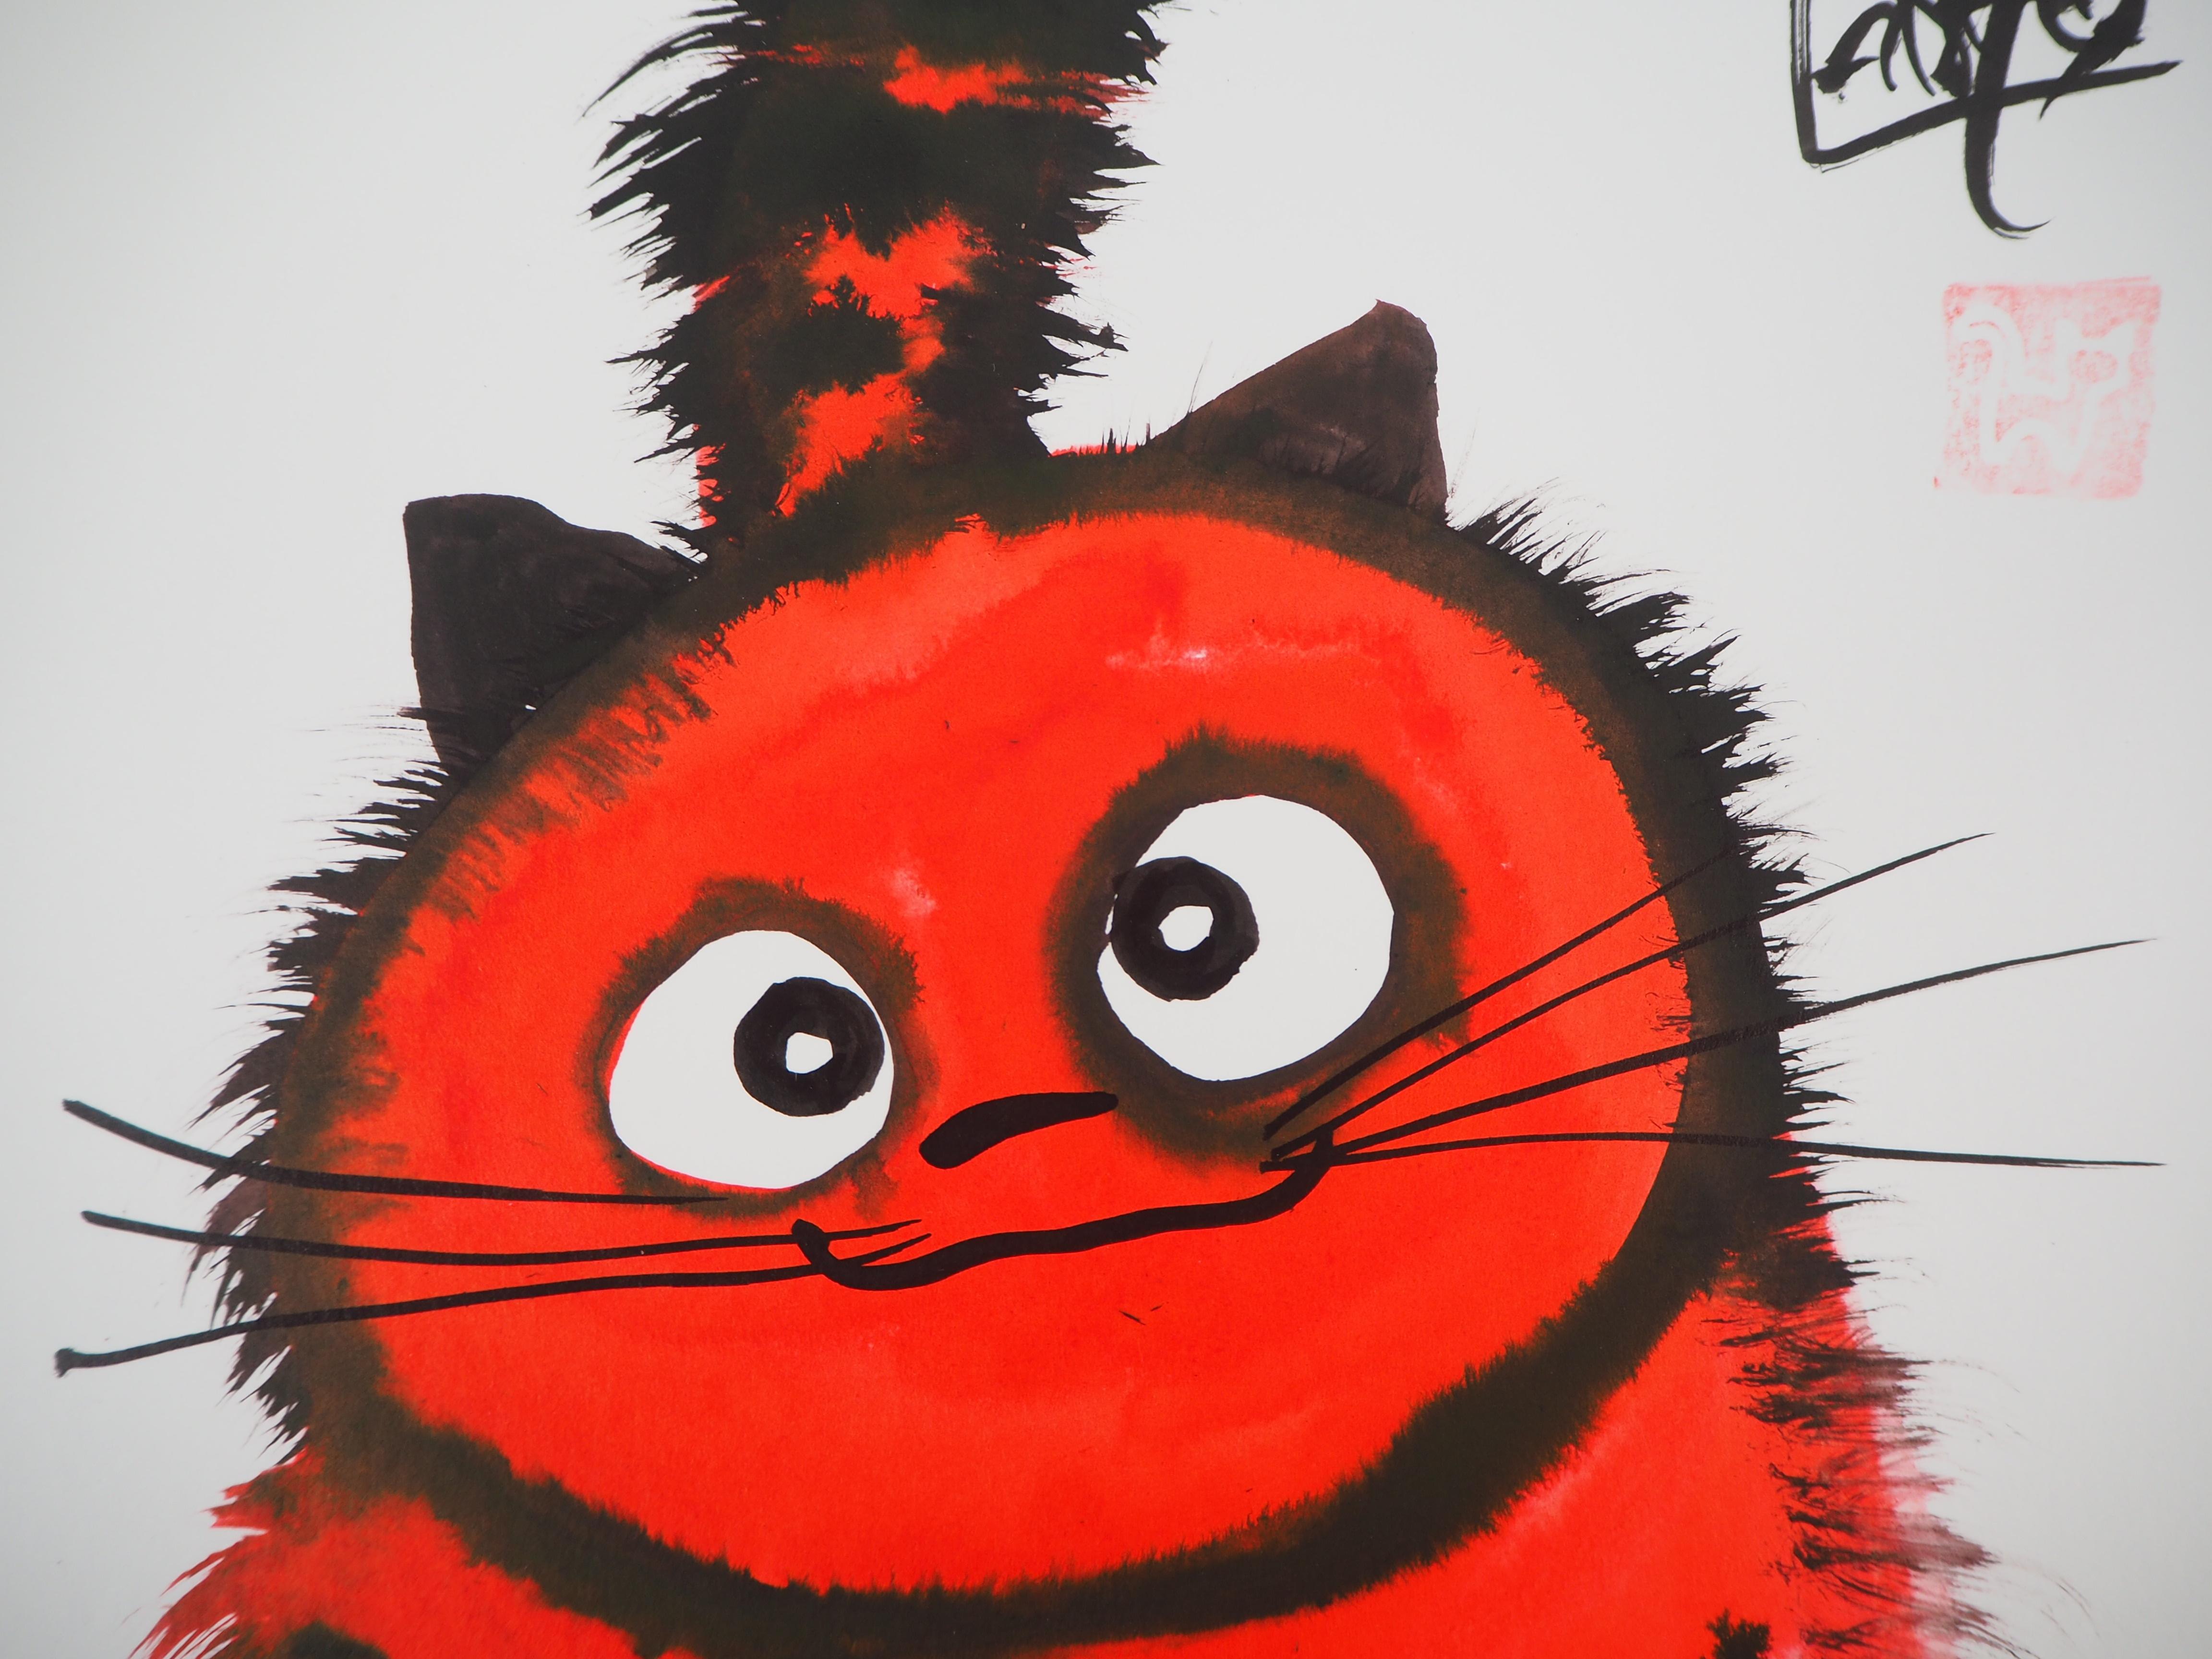 Big Red Cat Waiting for a Game - Handsigned Original Ink Drawing  - Modern Art by Laszlo Tibay